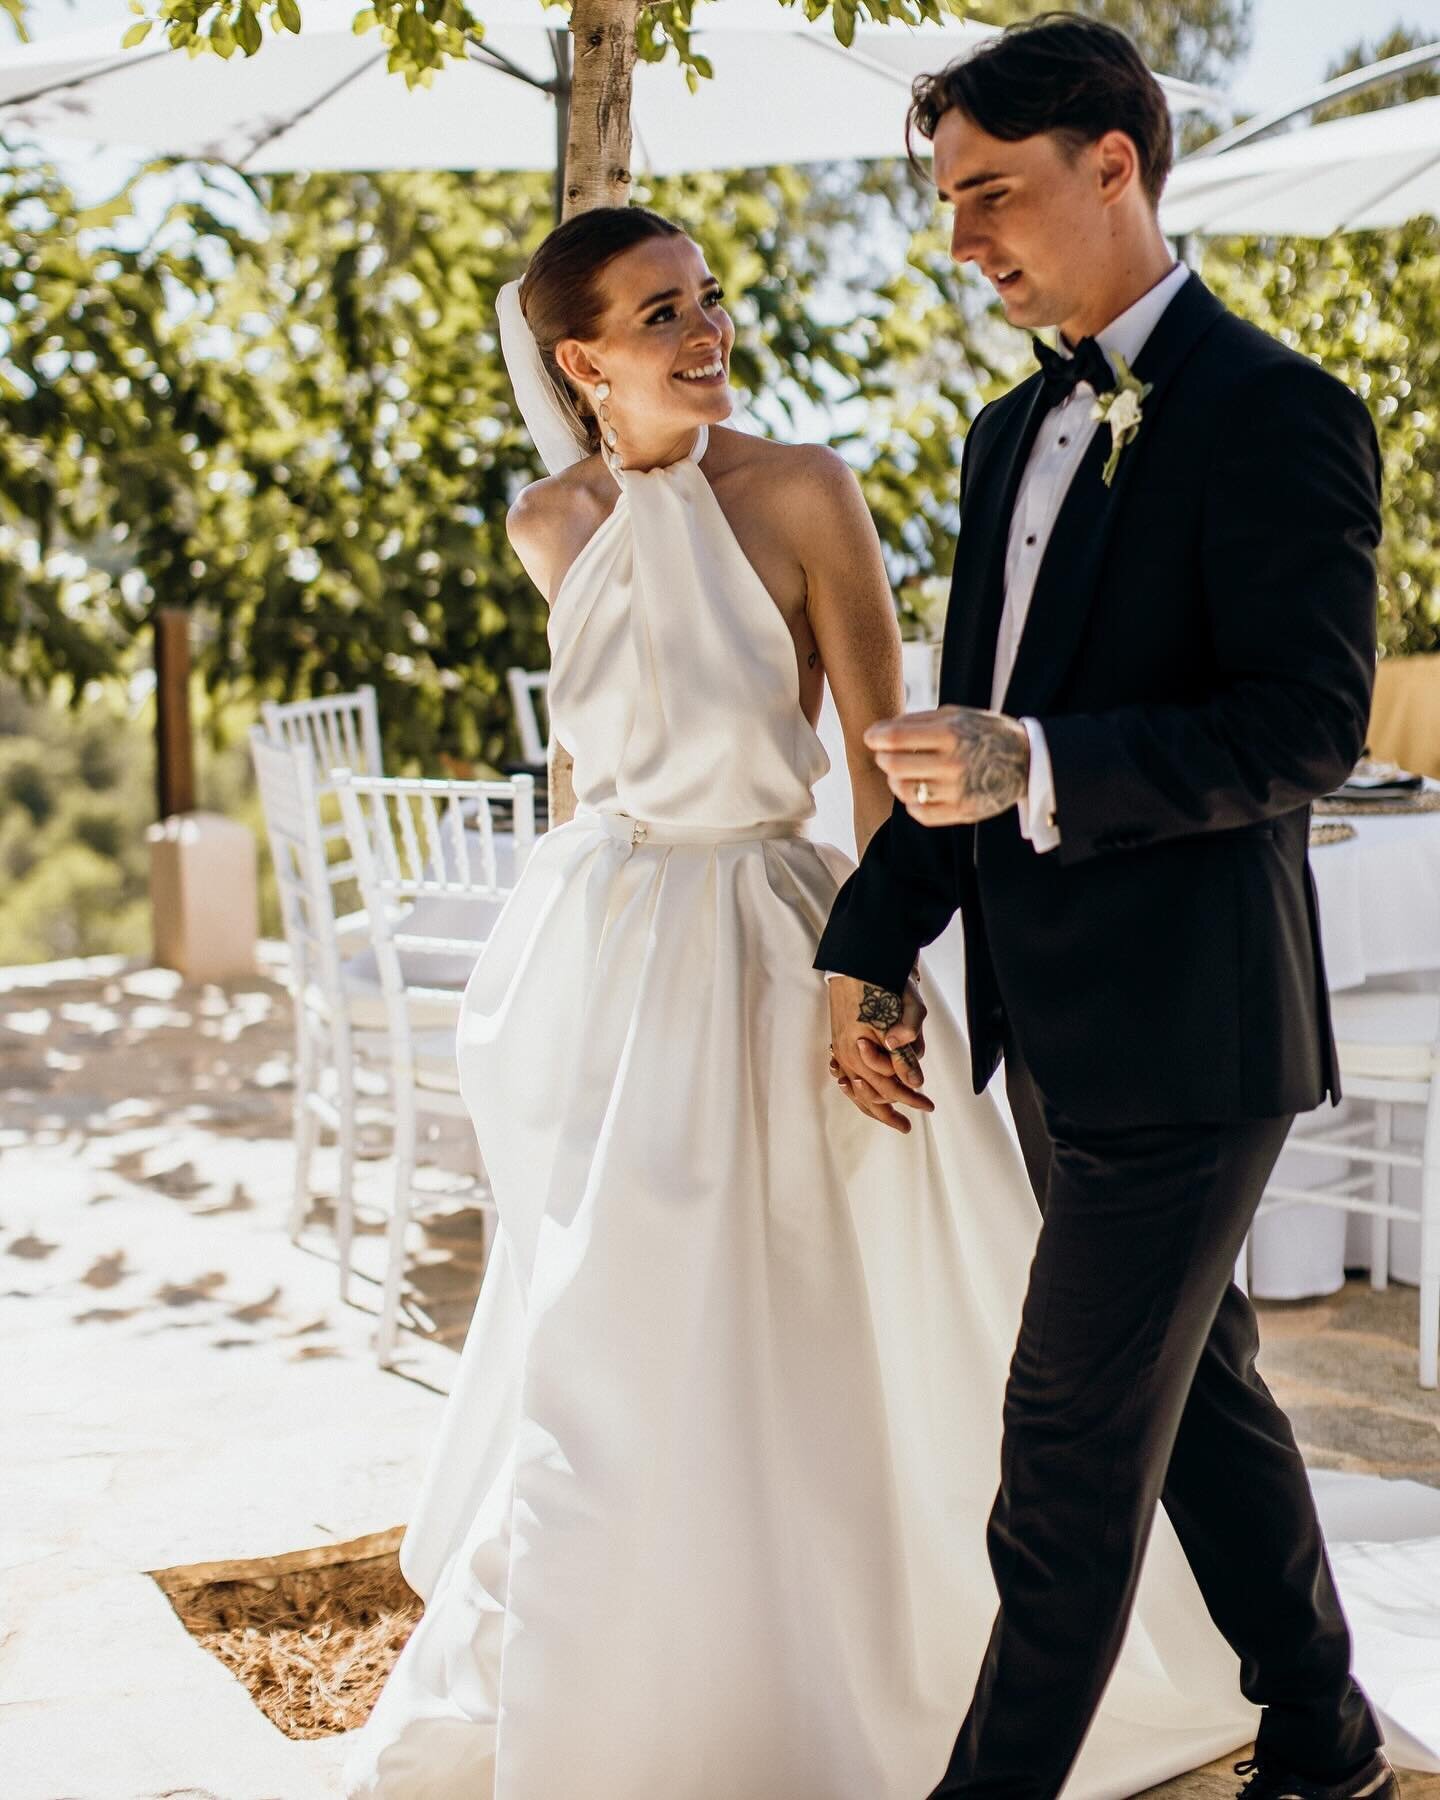 &ldquo;Standing in front of the mirror wearing the dress I felt a whole surge of emotions and I instantly knew it was the dress for me. Having the option of adding on an overskirt for the ceremony which gave me a completely different silhouette for w